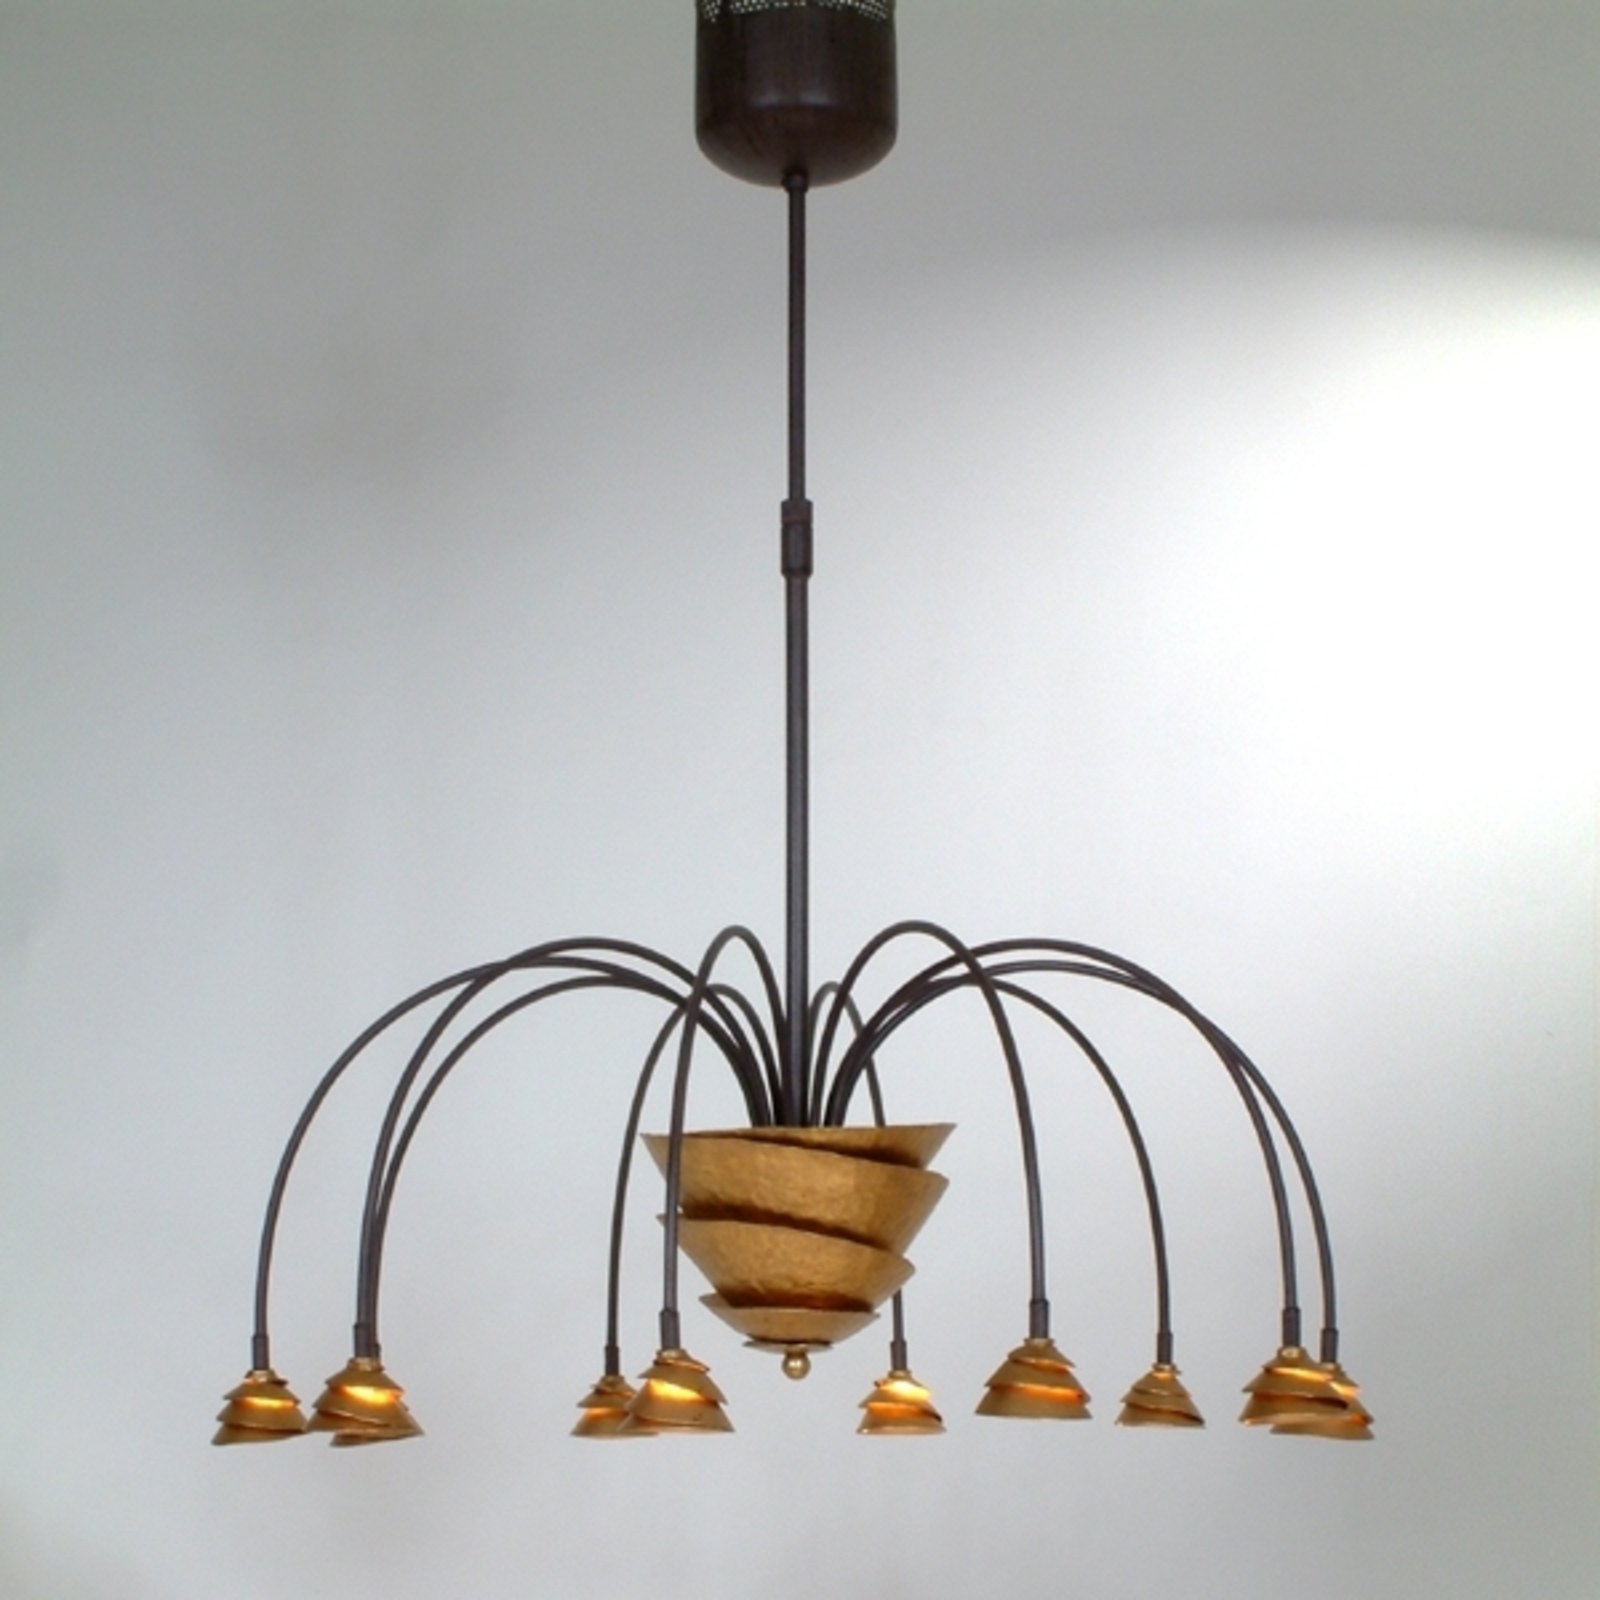 Exclusive hanging lamp FONTAINE iron, brown-gold